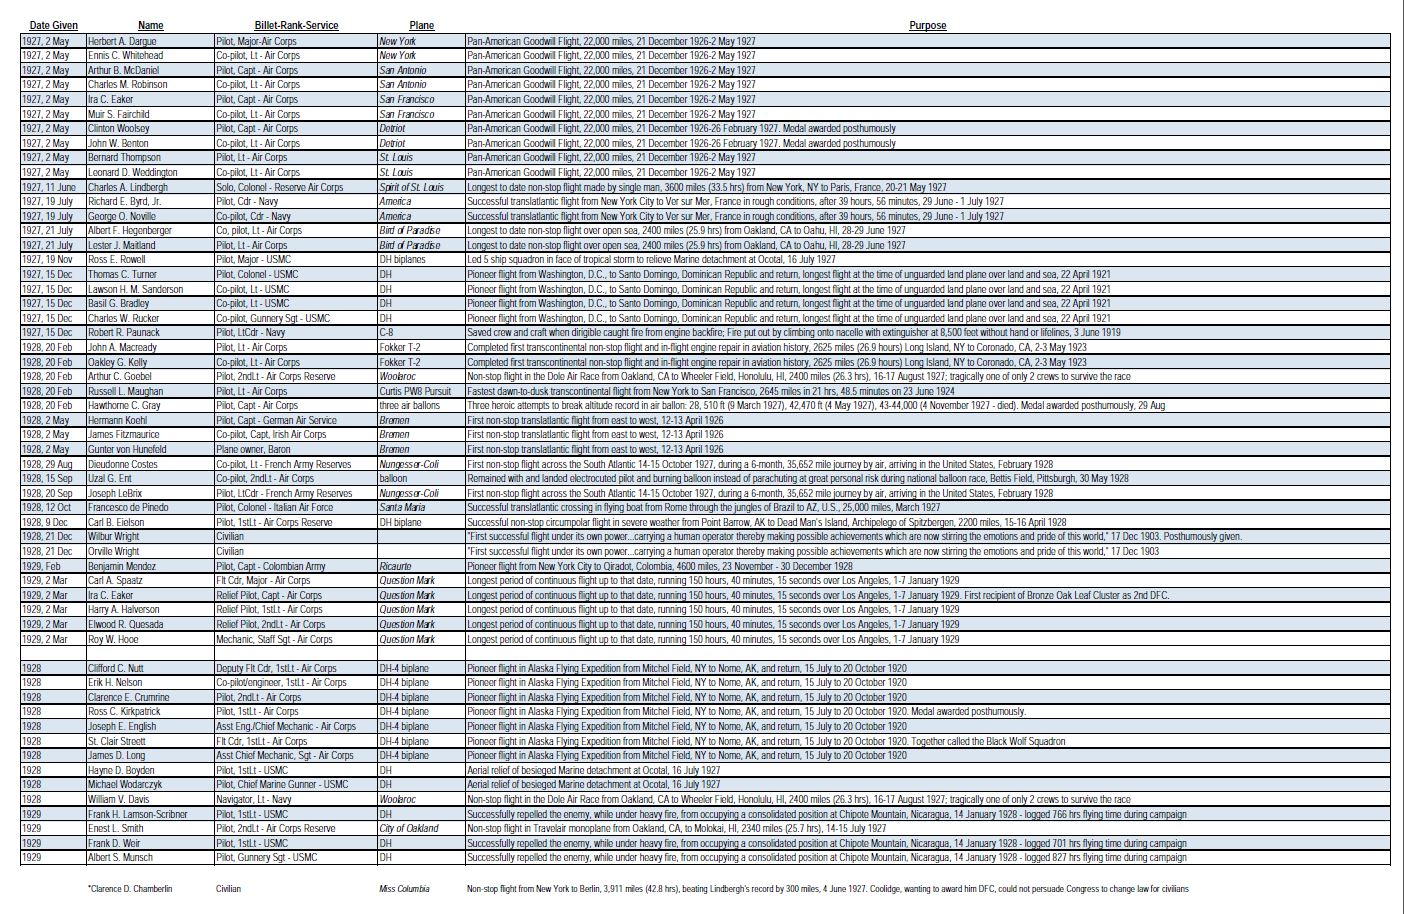 Here is a working list of the 55 individuals who were awarded the Distinguished Flying Cross during the Coolidge years. While many are not on this list including those who flew operations during this time period but were recognized later and certain civilians to whom the award was granted prior to revision of section 12 of the Air Commerce Act by Coolidge's Executive Order 4601 effective March 1, 1927. As research best confirms the names are in chronological order by date of award, with a second list noting known recipients by year only. 